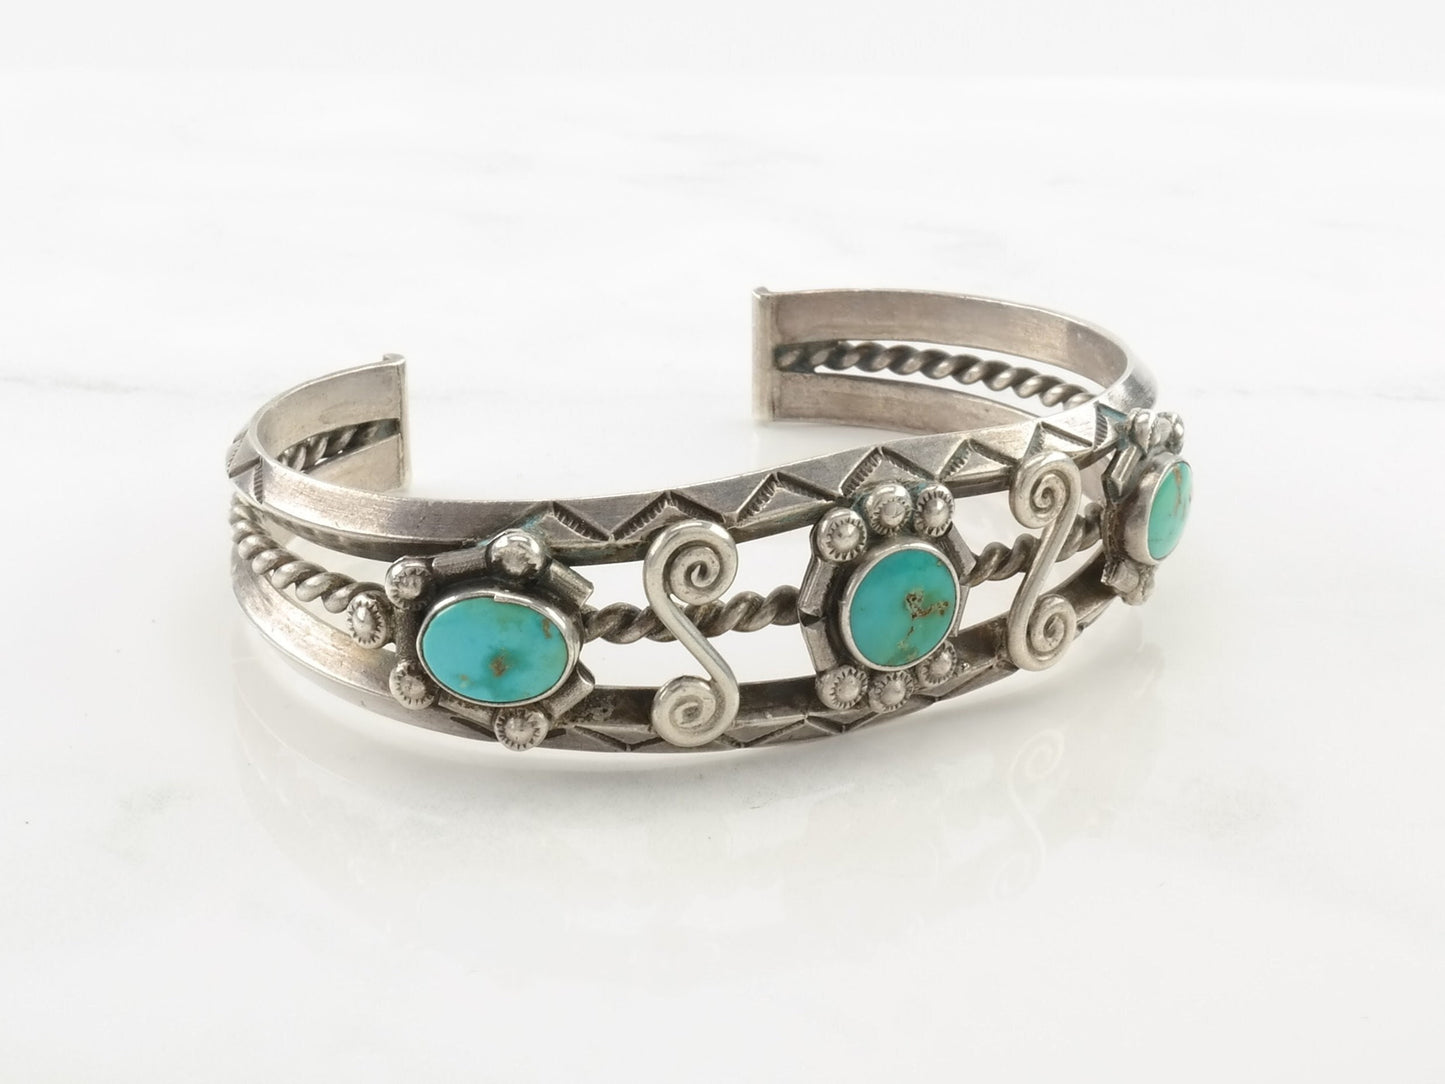 Native American Historic Blue Gem Turquoise Sterling Silver Cuff Bracelet